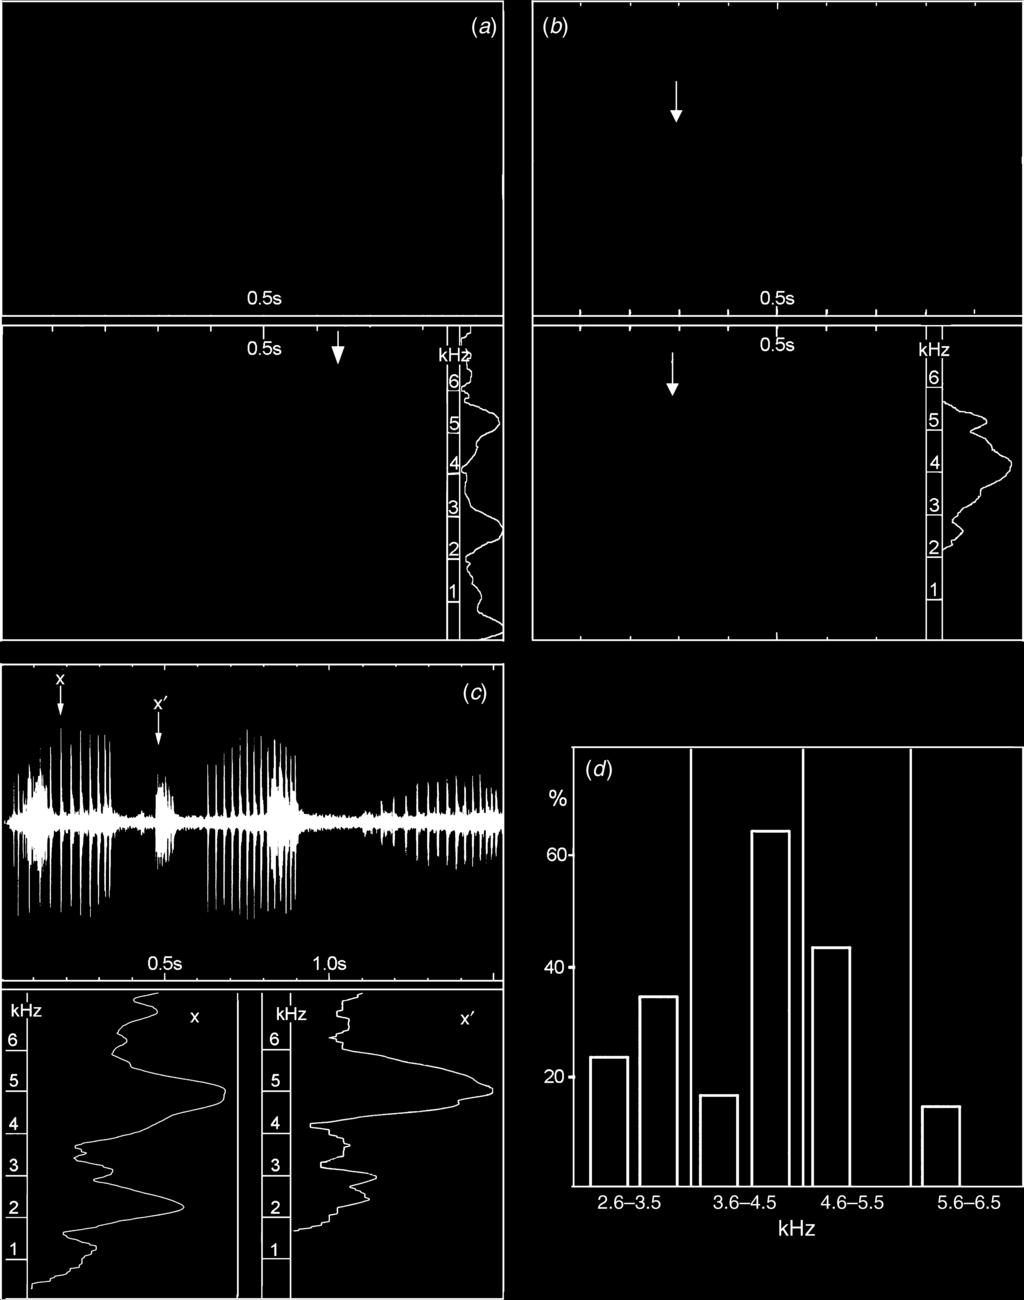 262 Australian Journal of Zoology J. I. Menzies et al. Fig. 4. (a) Wave form (upper), spectrogram and frequency spectrum (lower) of two long calls of Litoria viranula probably made by different frogs.